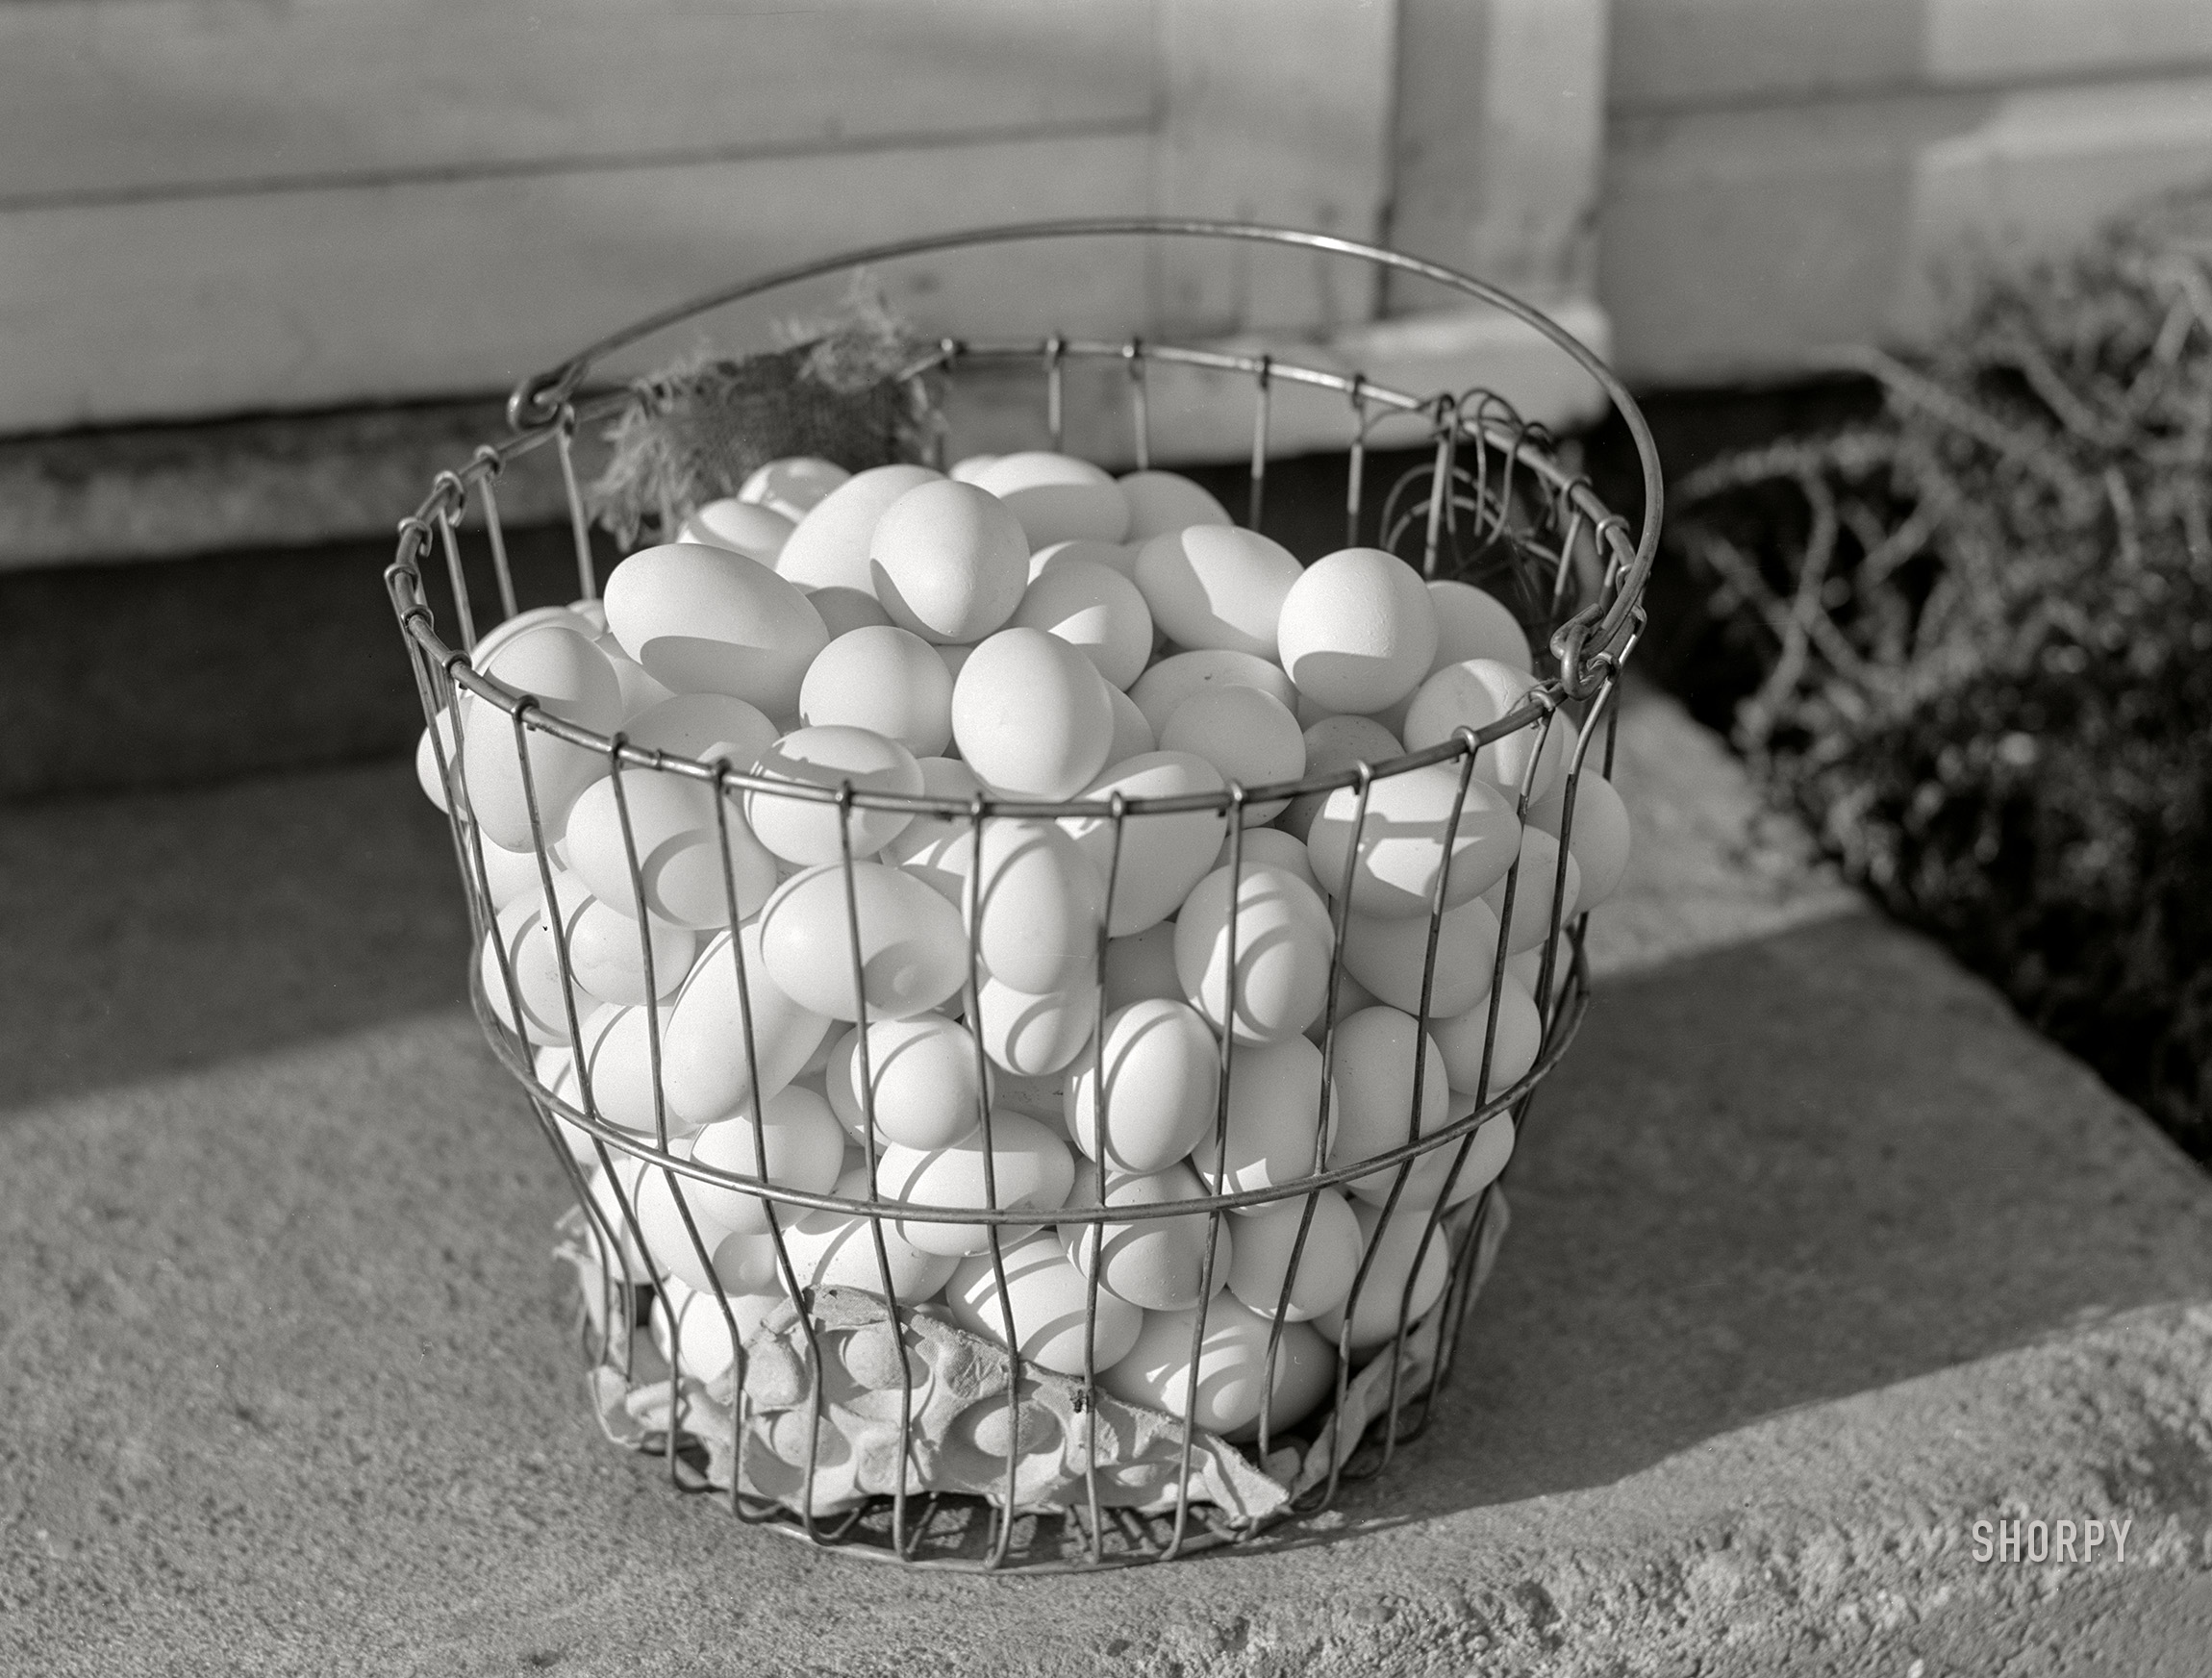 September 1941. Waterloo, Nebraska. "Eggs of Two Rivers Non-Stock Cooperative. At the present time co-op eggs are marketed through large cafes, restaurants and eating houses, and various hospitals and institutions. The demand for the co-op's premium eggs is in excess of supply." Photo by Marion Post Wolcott for the Farm Security Administration. View full size.